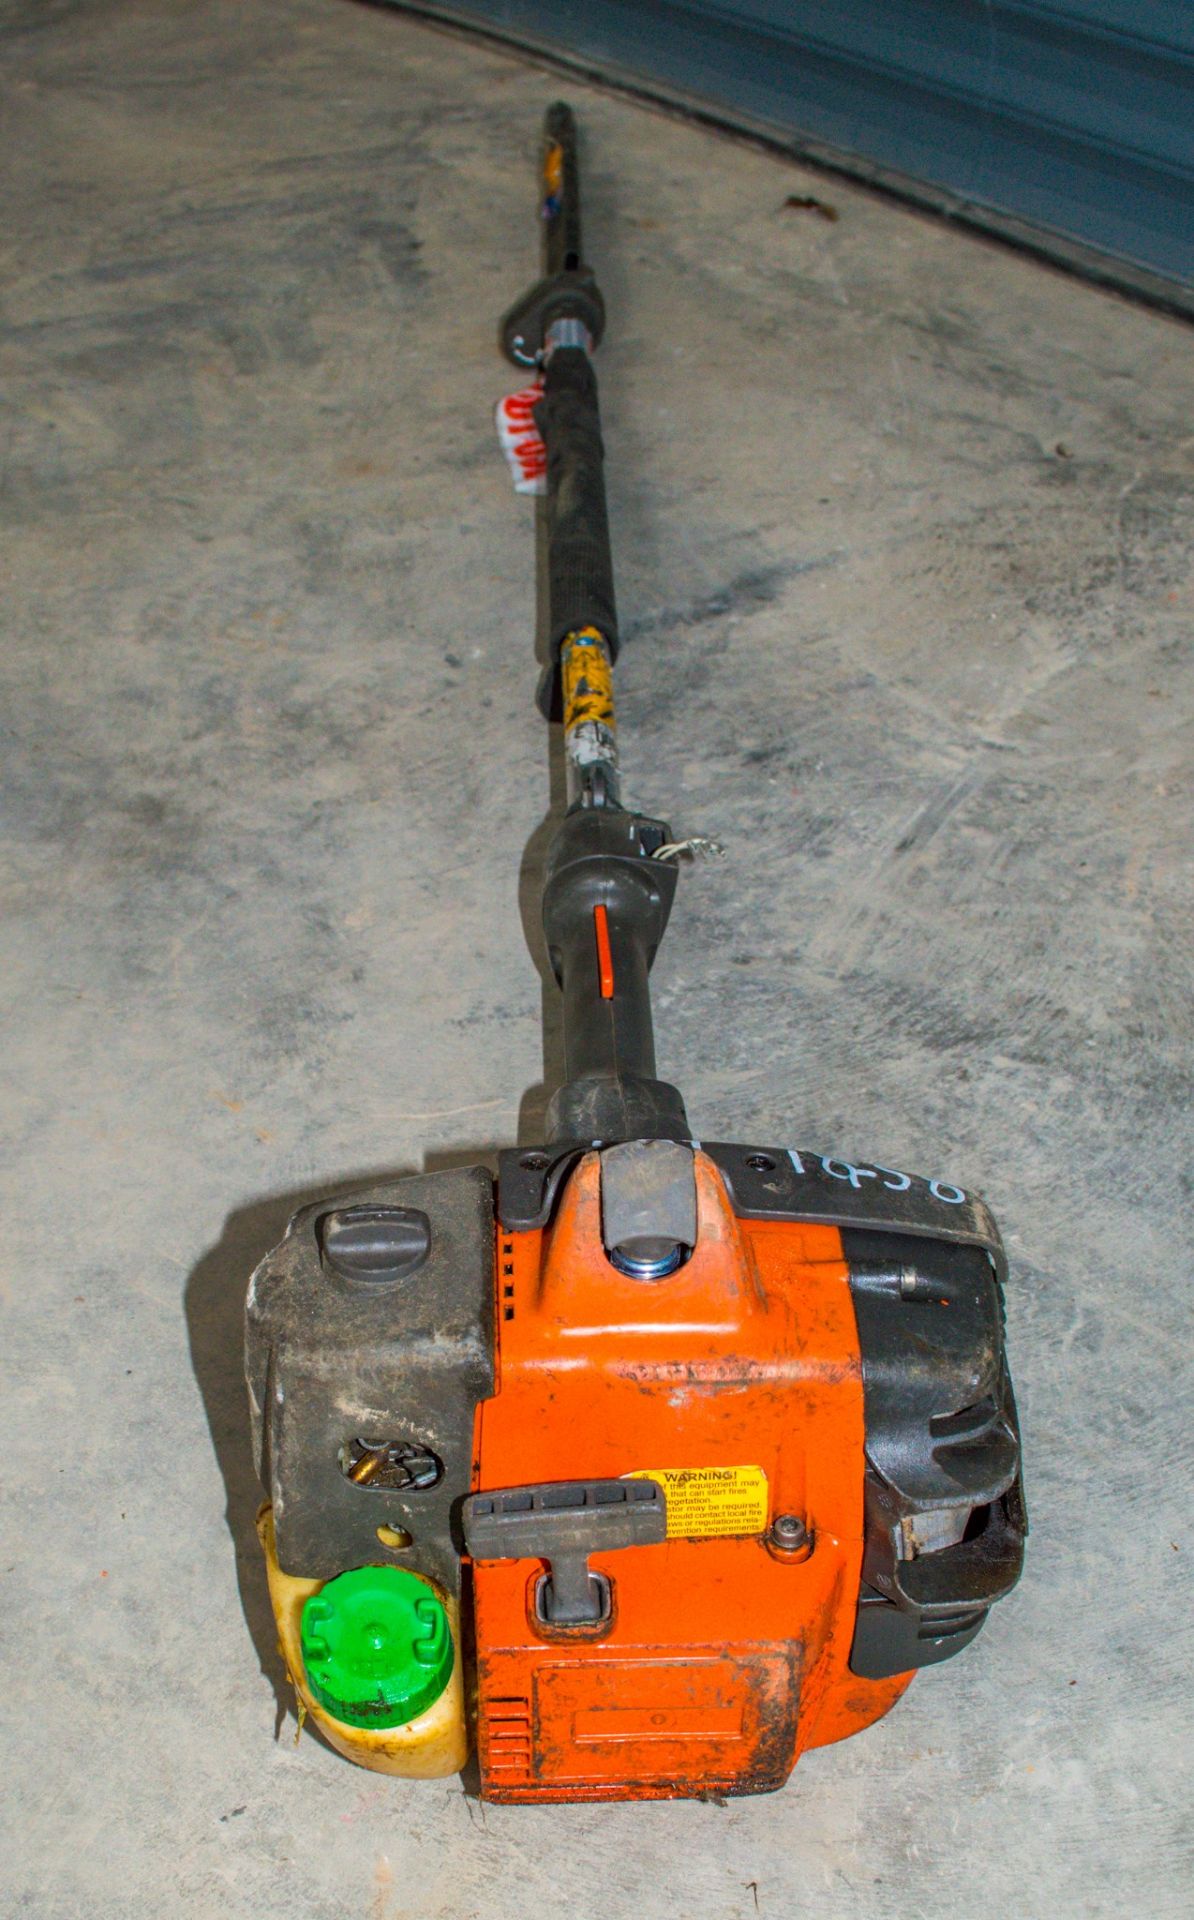 Husqvarna 327HE4 petrol driven strimmer 16031239 ** No head or power switch ** - Image 2 of 2